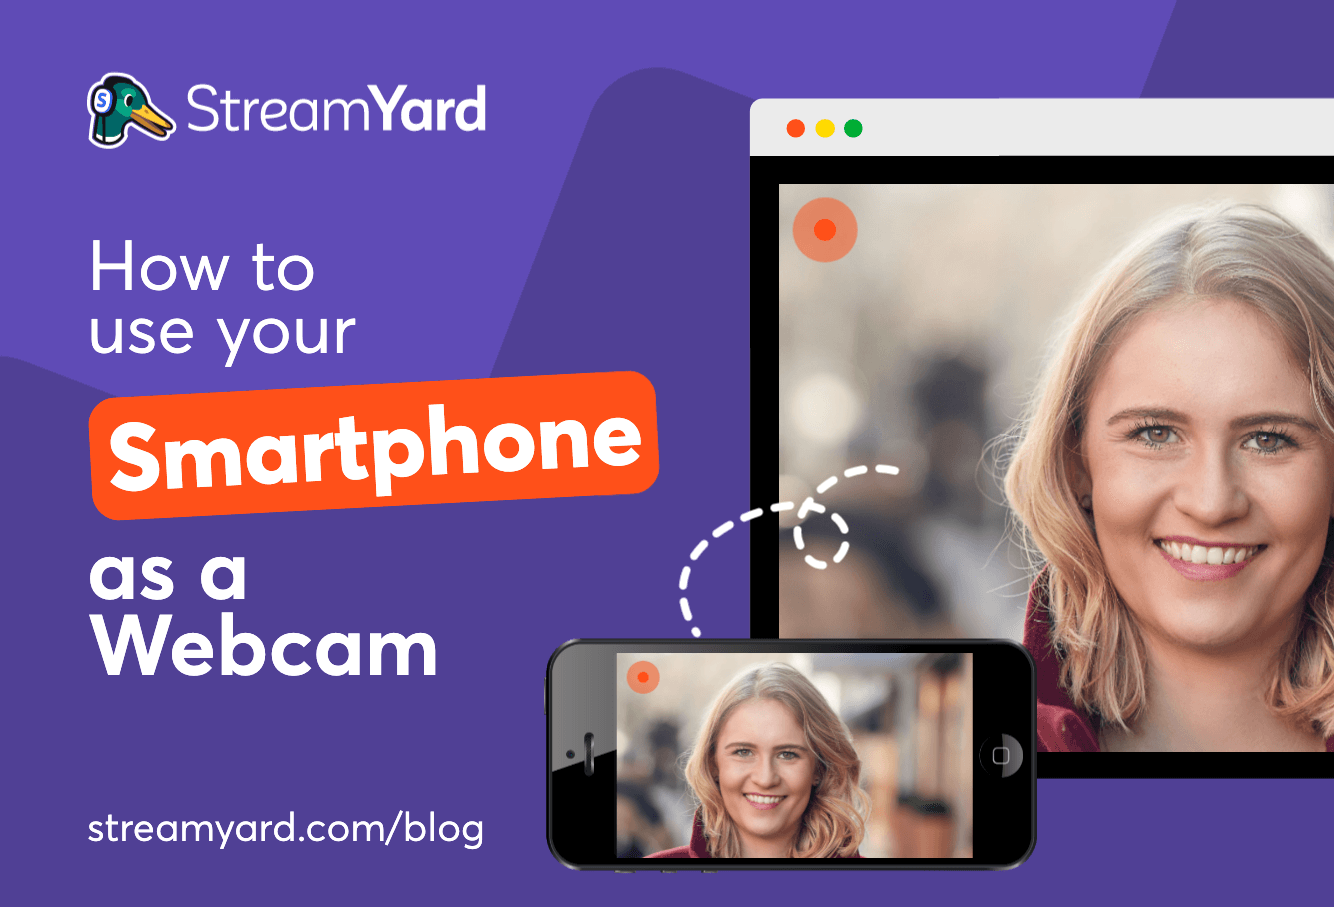 Learn about tools that will allow you to use your iPhone or Android phone as a webcam for live streaming, pre-recorded videos, and more.